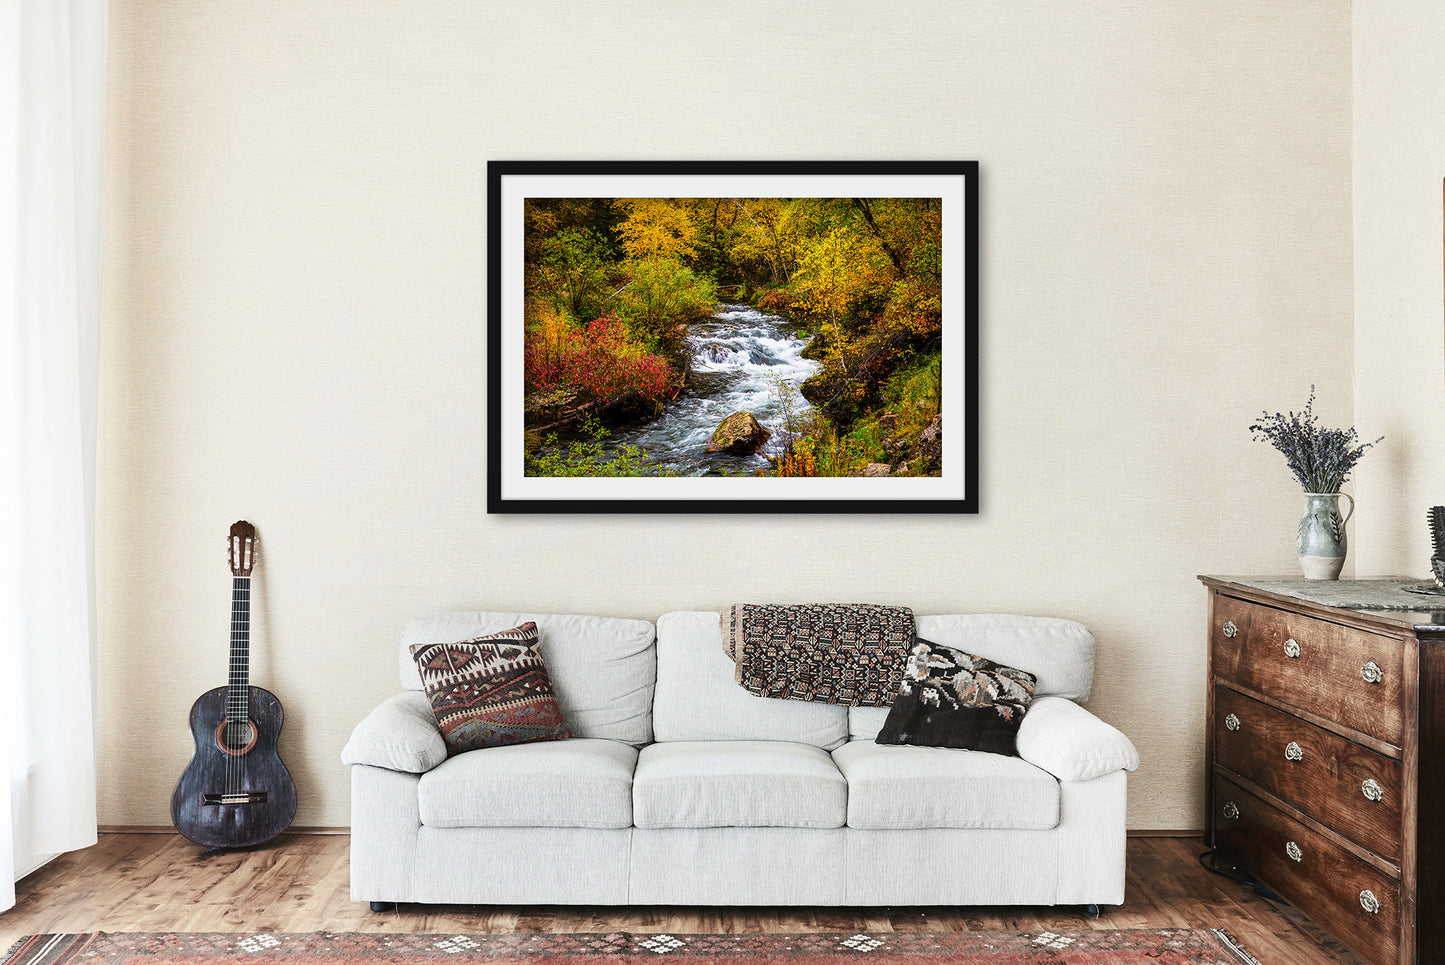 Framed Black Hills Print (Ready to Hang) Picture of Creek and Fall Foliage in Spearfish Canyon South Dakota Western Wall Art Nature Decor